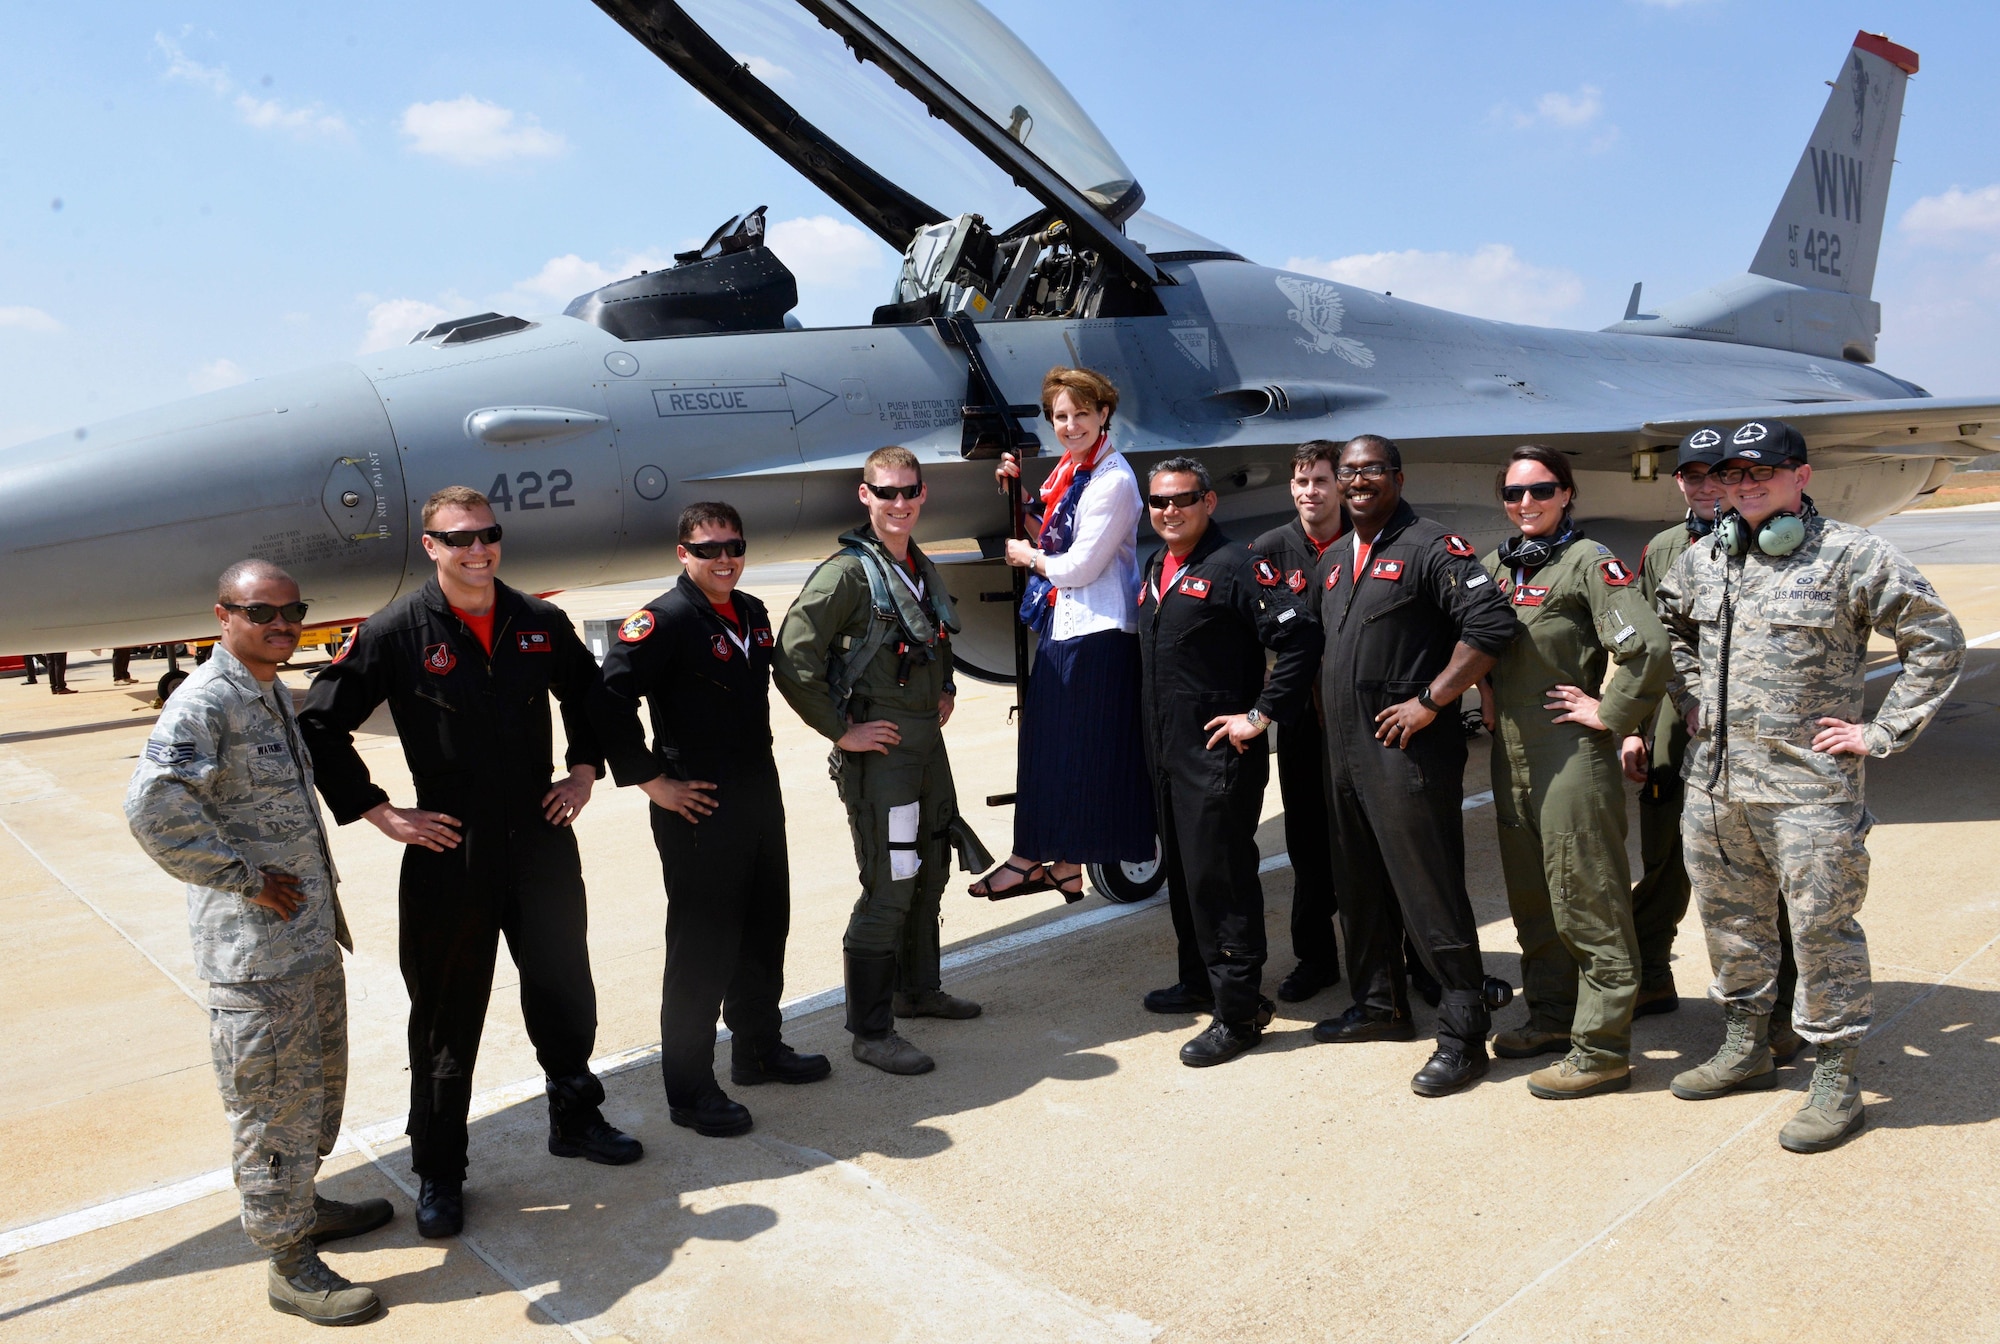 The U.S. Air Force's Pacific Air Forces Demonstration Team members pose for a photo with MaryKay Carlson, Charge d'Affaire for U.S. Mission to India during opening day events for Aero India 2017 at Air Force Station Yelahanka Feb. 16, 2017. The F-16 Fighting Falcon is a compact, multi-role fighter aircraft. It is highly maneuverable and has proven itself in air-to-air combat and air-to-surface attack and provides a relatively low-cost, high-performance weapon system for the United States and allied nations. The United States participates in air shows and other regional events to demonstrate its commitment to the security of the Indo-Asia-Pacific region, promote the standardization and interoperability of equipment, and display capabilities critical to the success of current and future military operations. (U.S. Air Force photo by Capt. Mark Lazane)